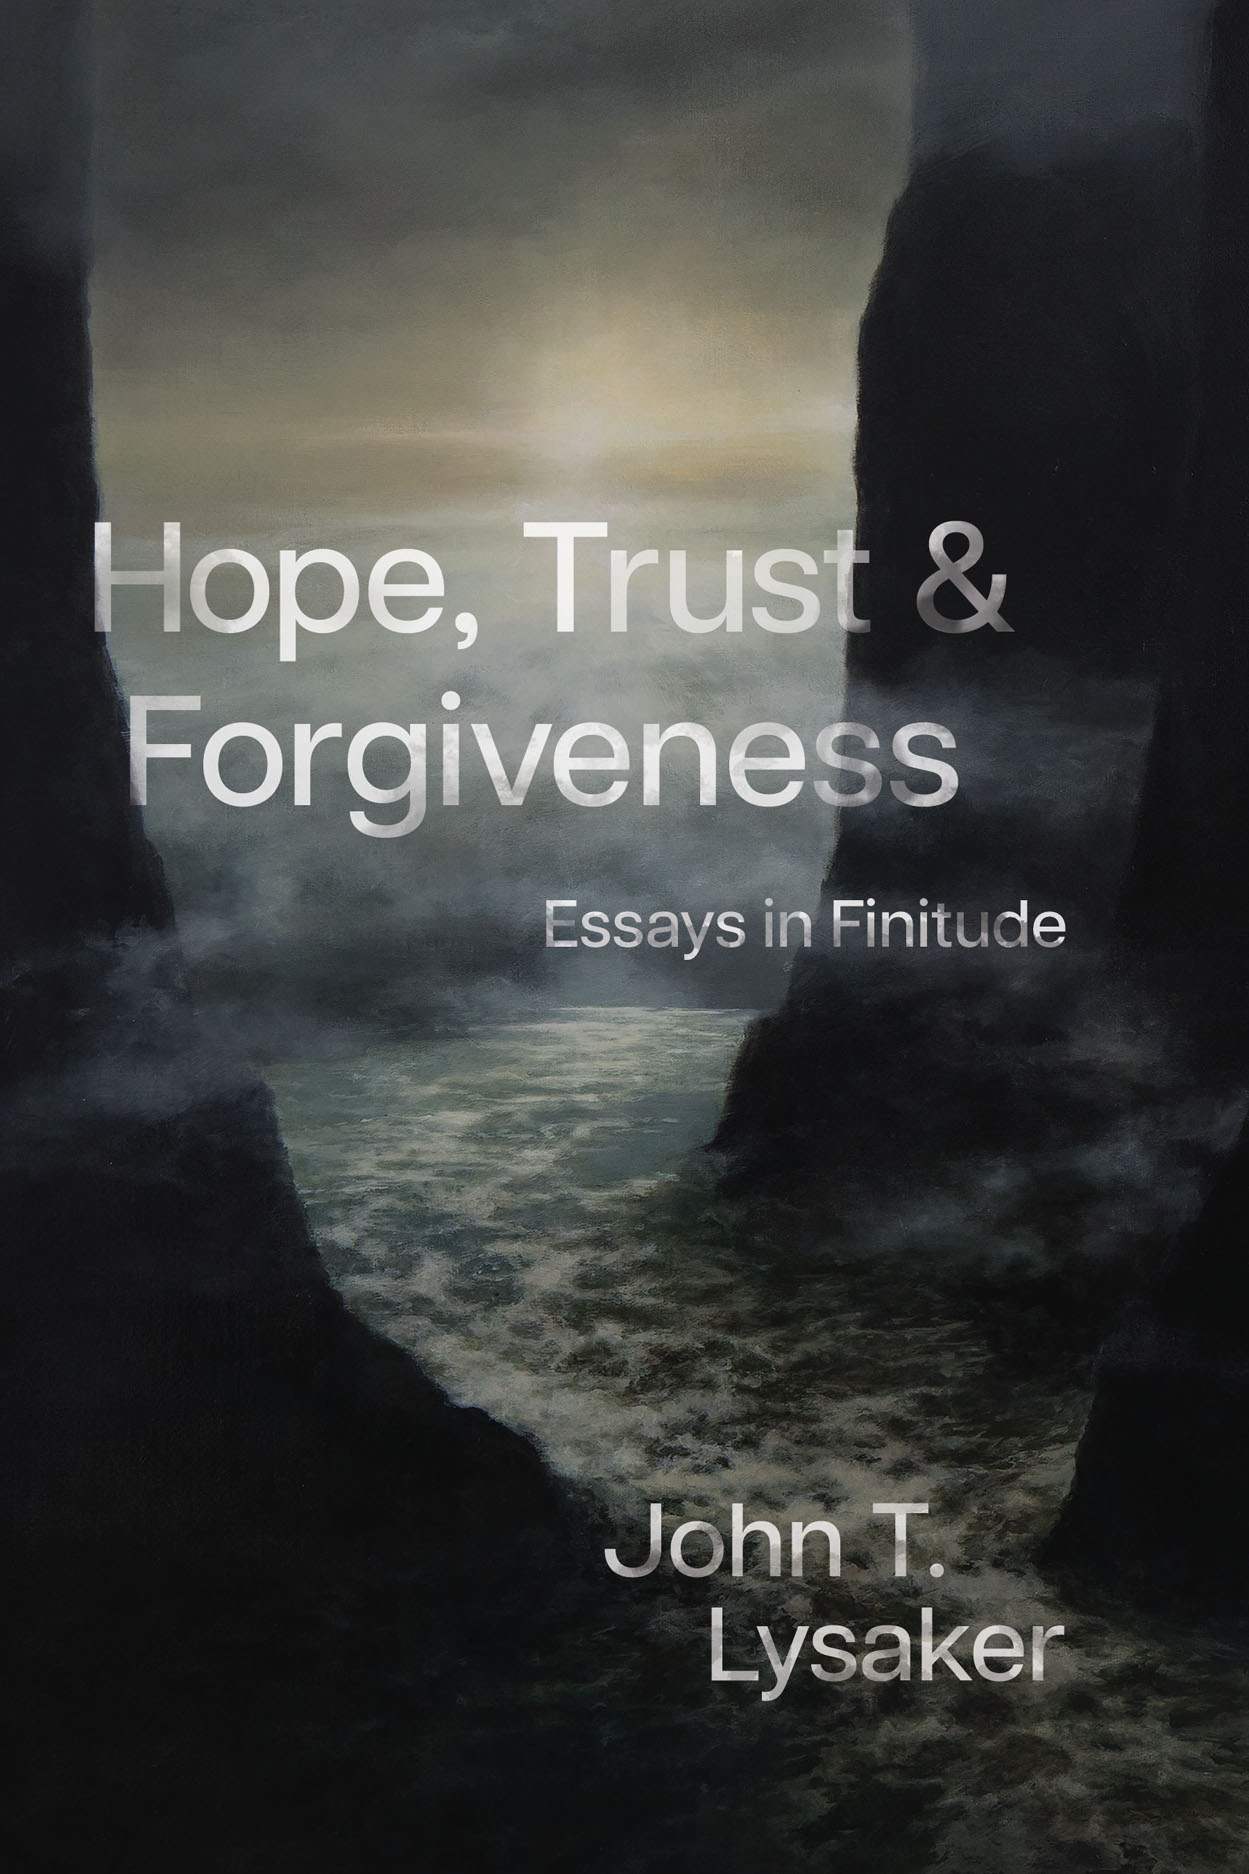 Goodness with Edges, A Guest Post from John Lysaker